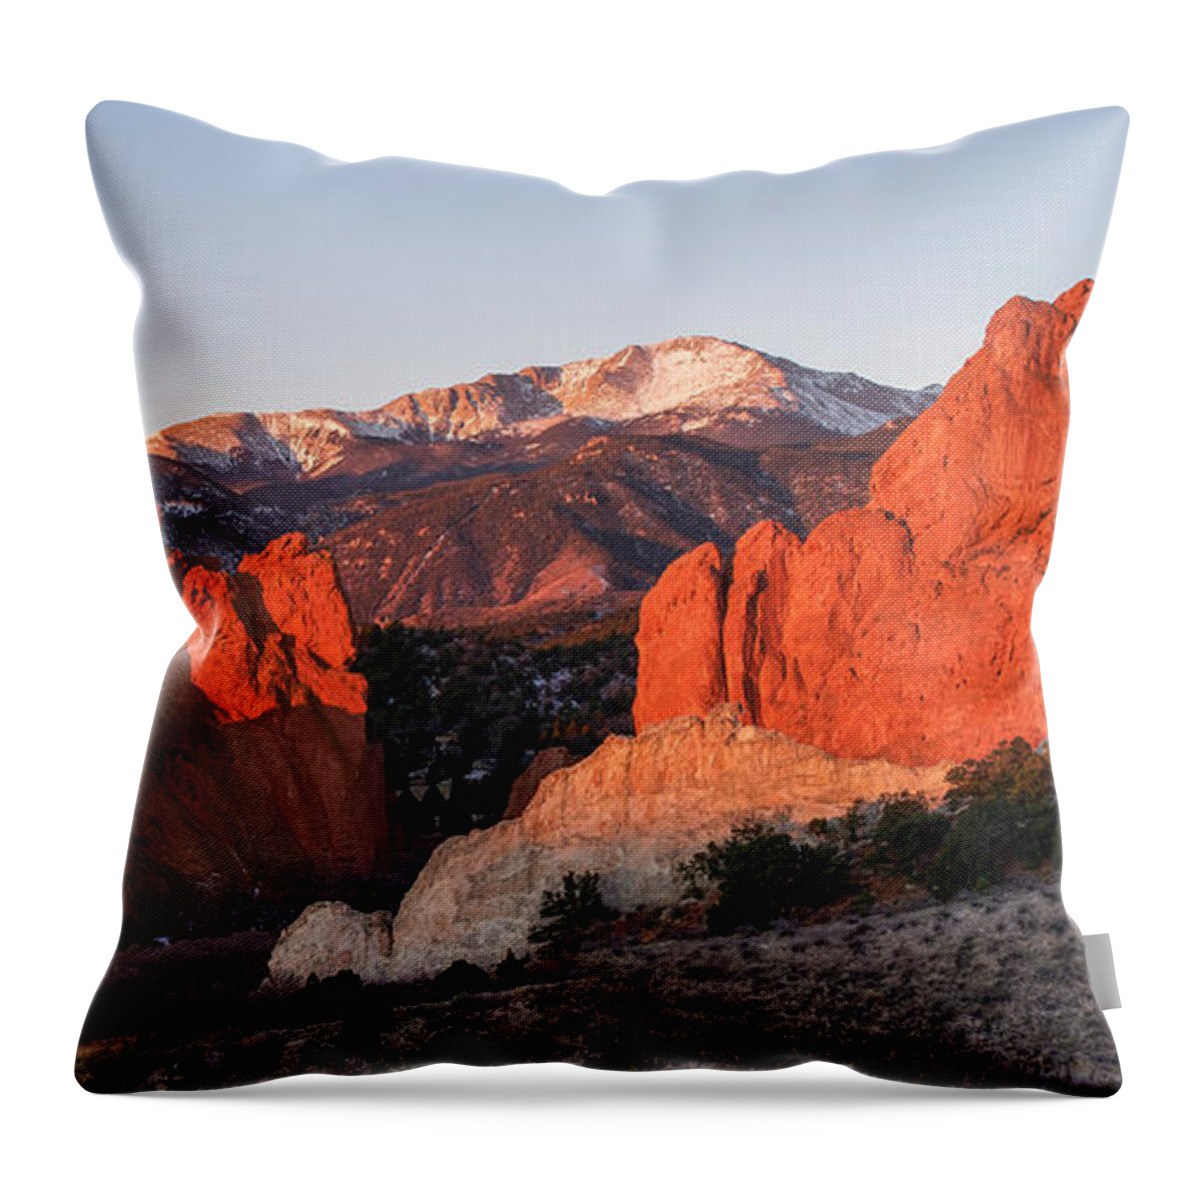 Garden Throw Pillow featuring the photograph Pikes Peak 2 by Aaron Spong